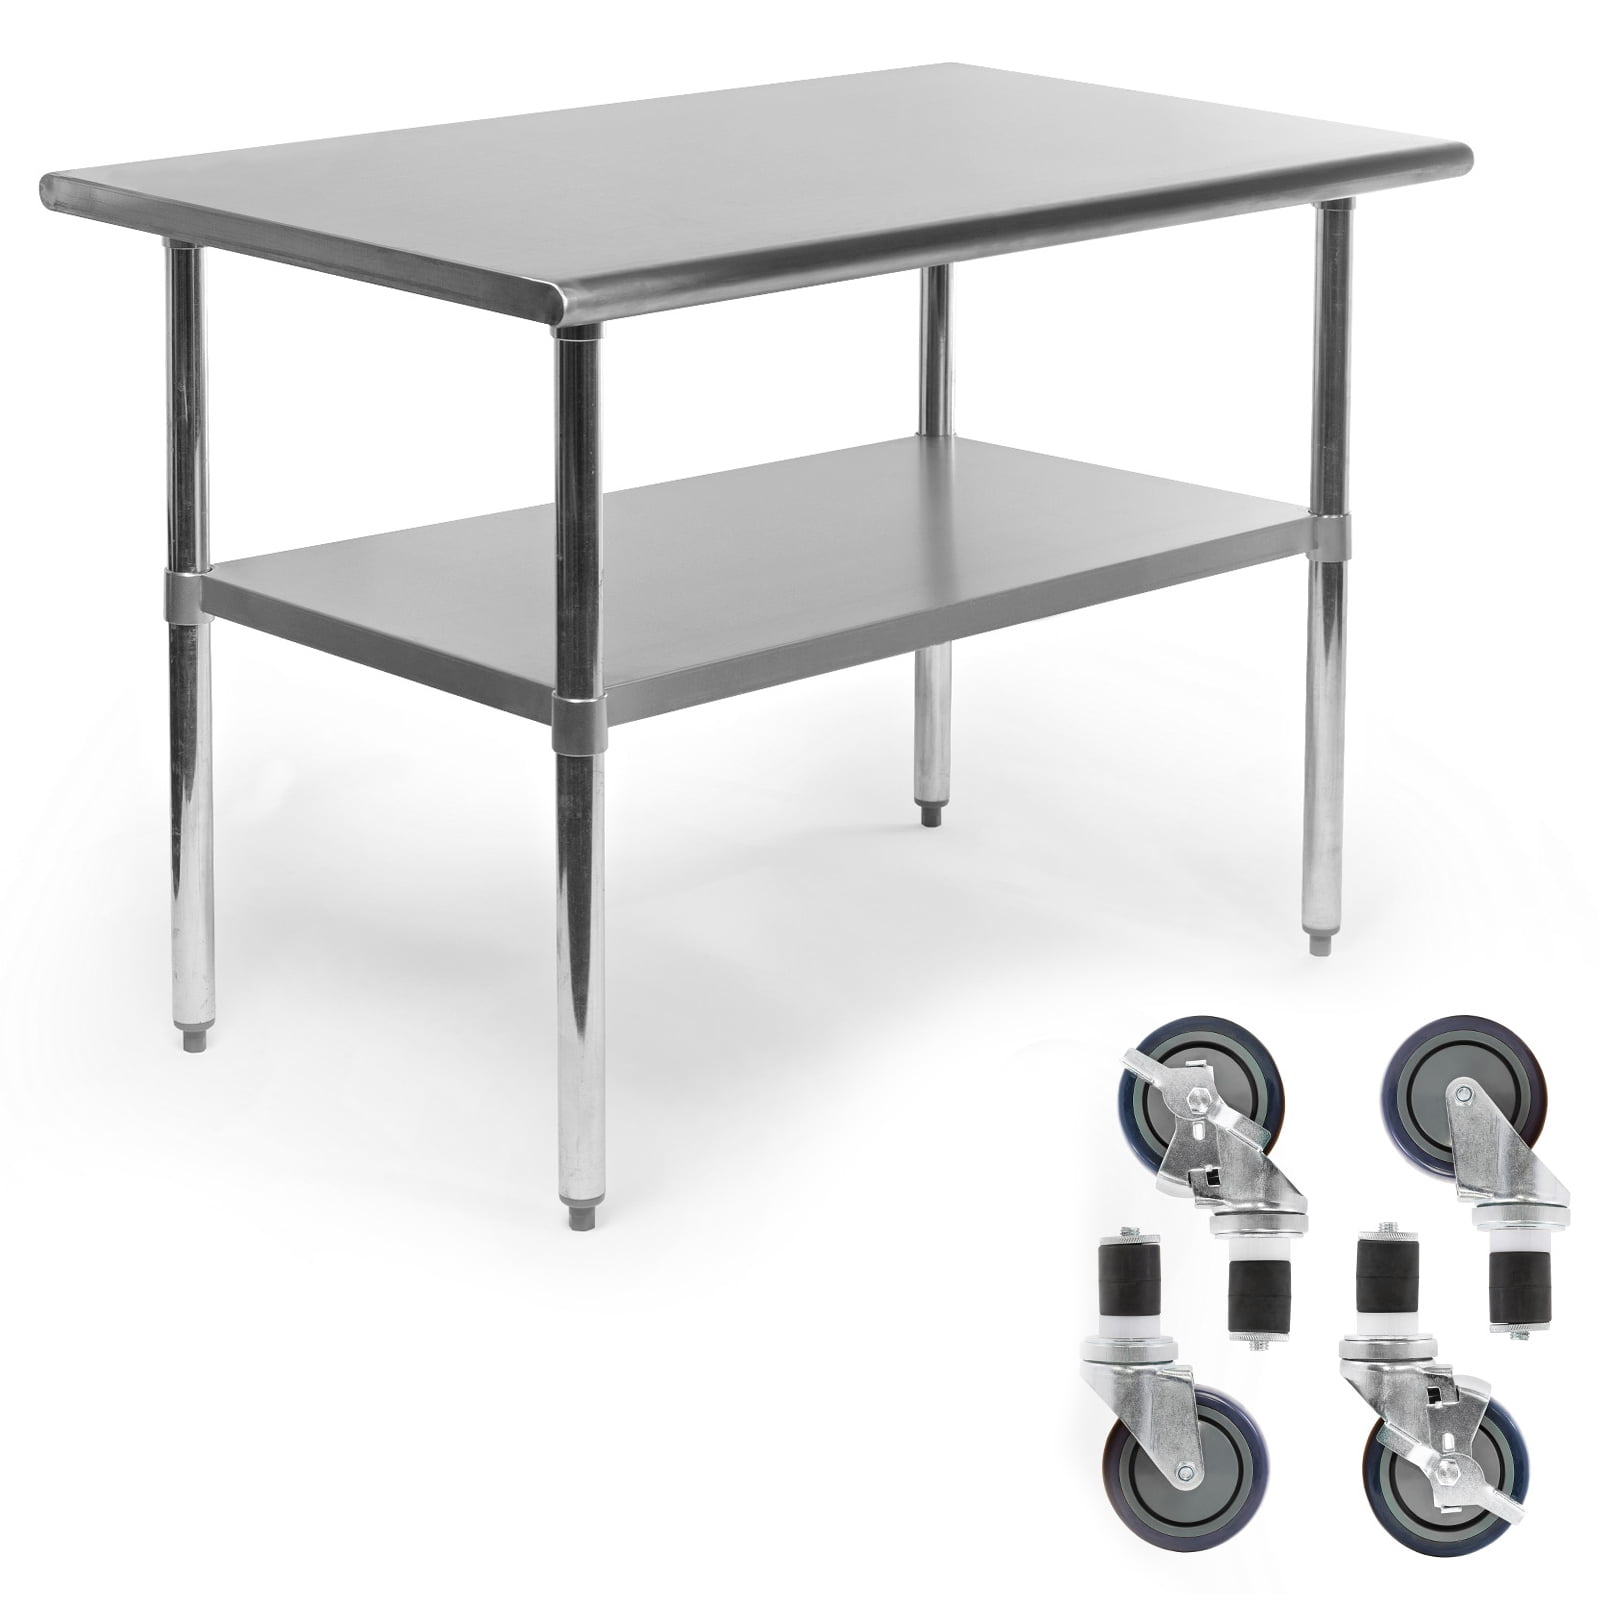 GRIDMANN NSF Stainless Steel Commercial Kitchen Prep & Work Table w/ 4 Caster Wheels For Stainless Steel Tables